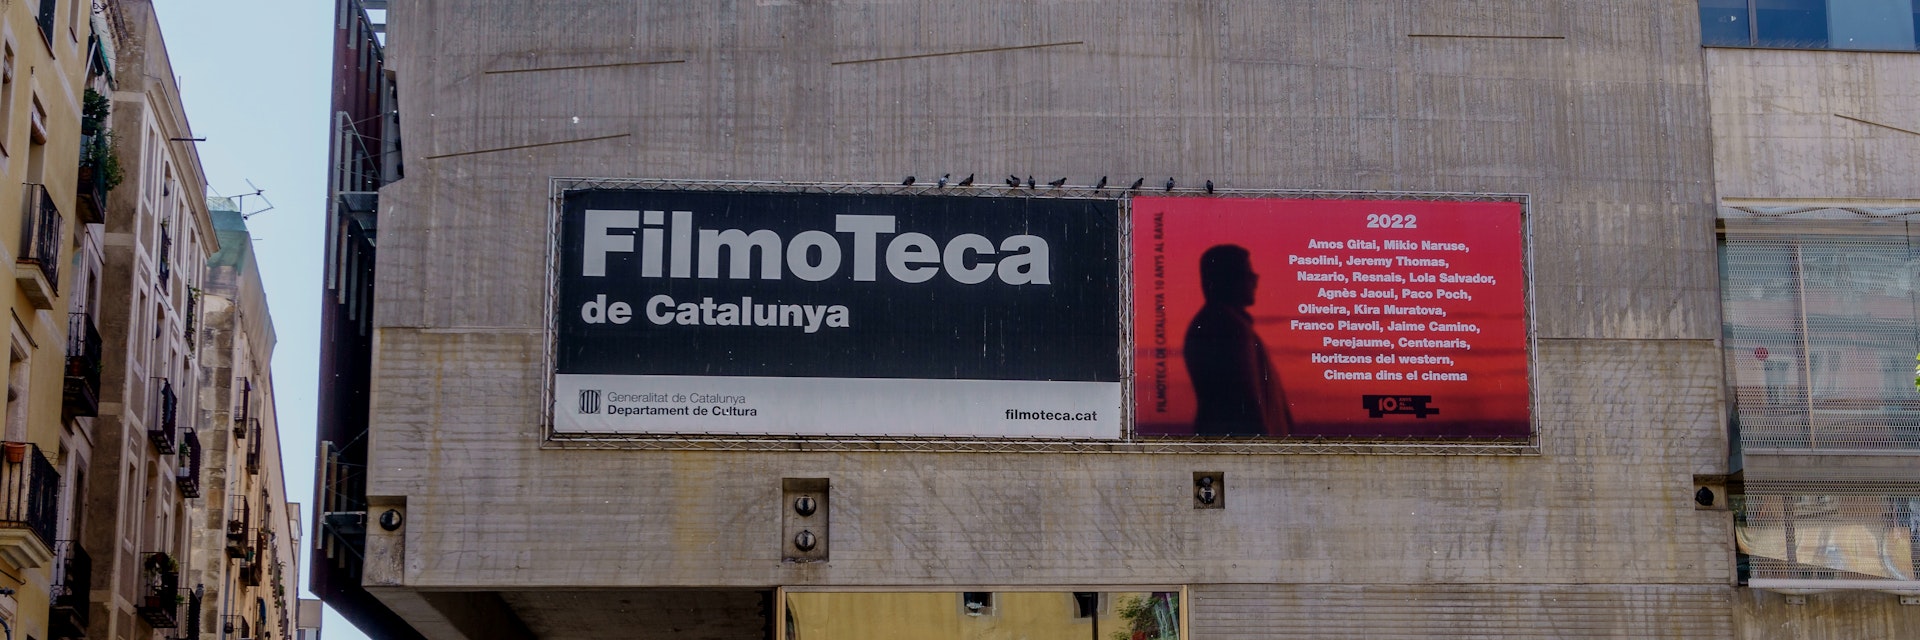 Filmoteca de Cataluña, Spain, is a cultural institution dedicated to the preservation of film material and the dissemination of film culture